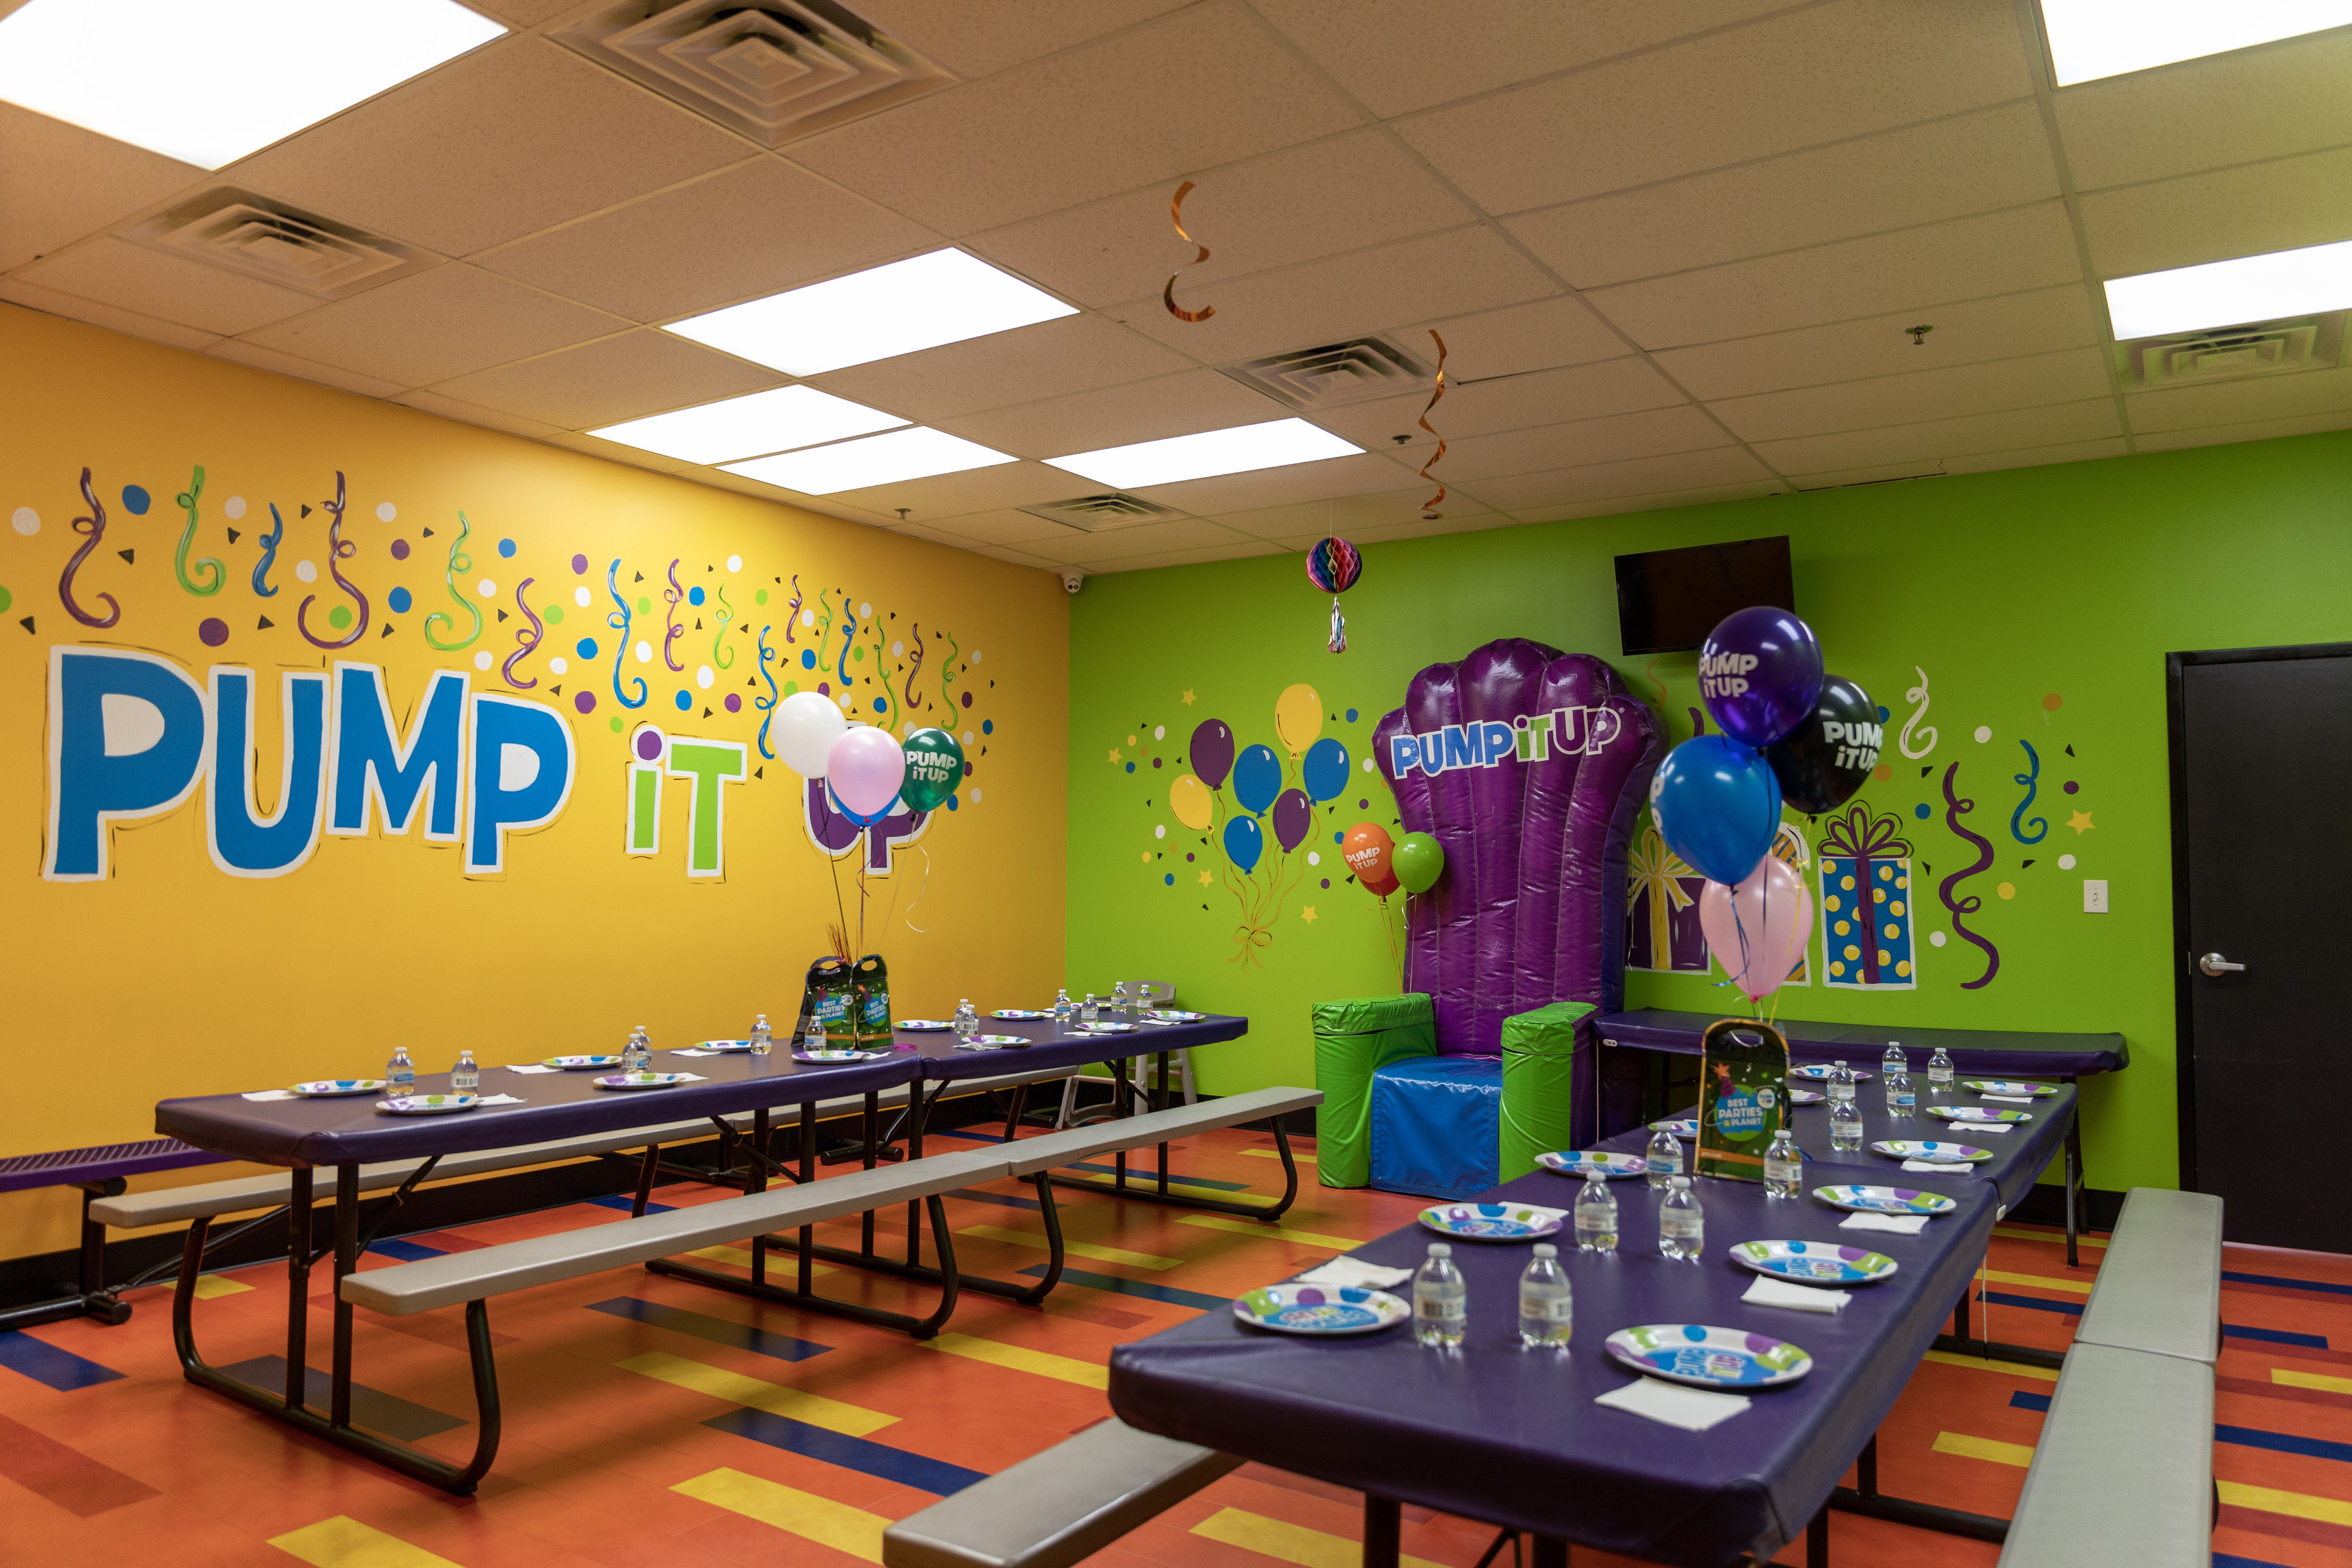 Pump It Up Bartlett TN private party room with tables and an inflatable throne for birthday child to sit on.